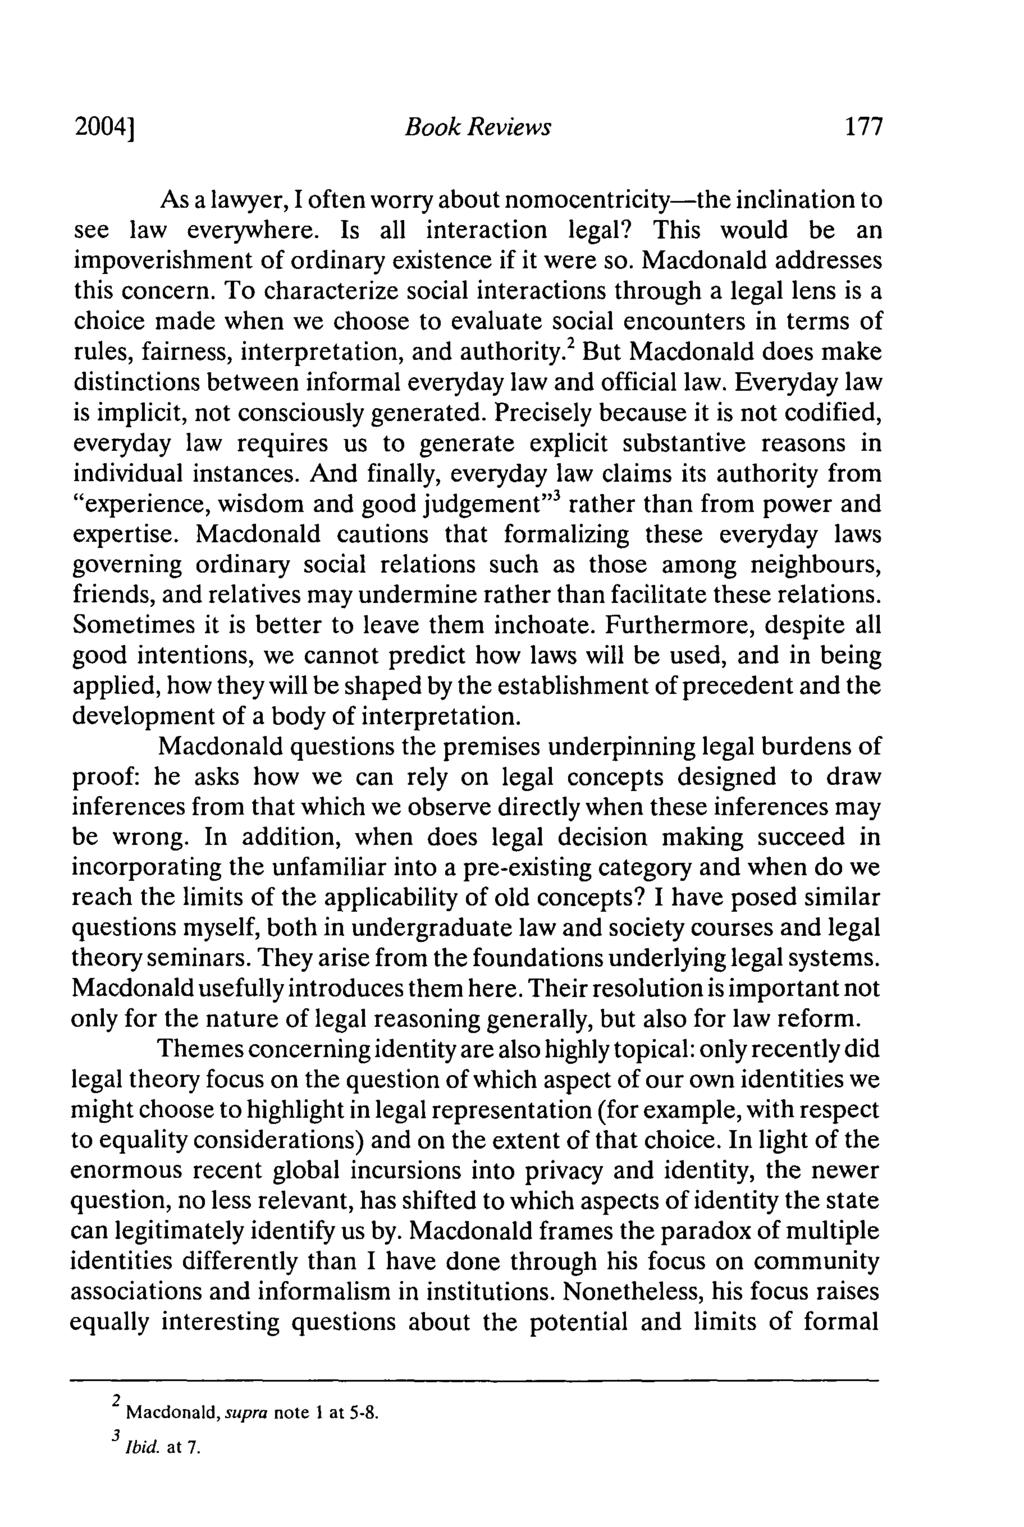 20041 Book Reviews As a lawyer, I often worry about nomocentricity-the inclination to see law everywhere. Is all interaction legal? This would be an impoverishment of ordinary existence if it were so.